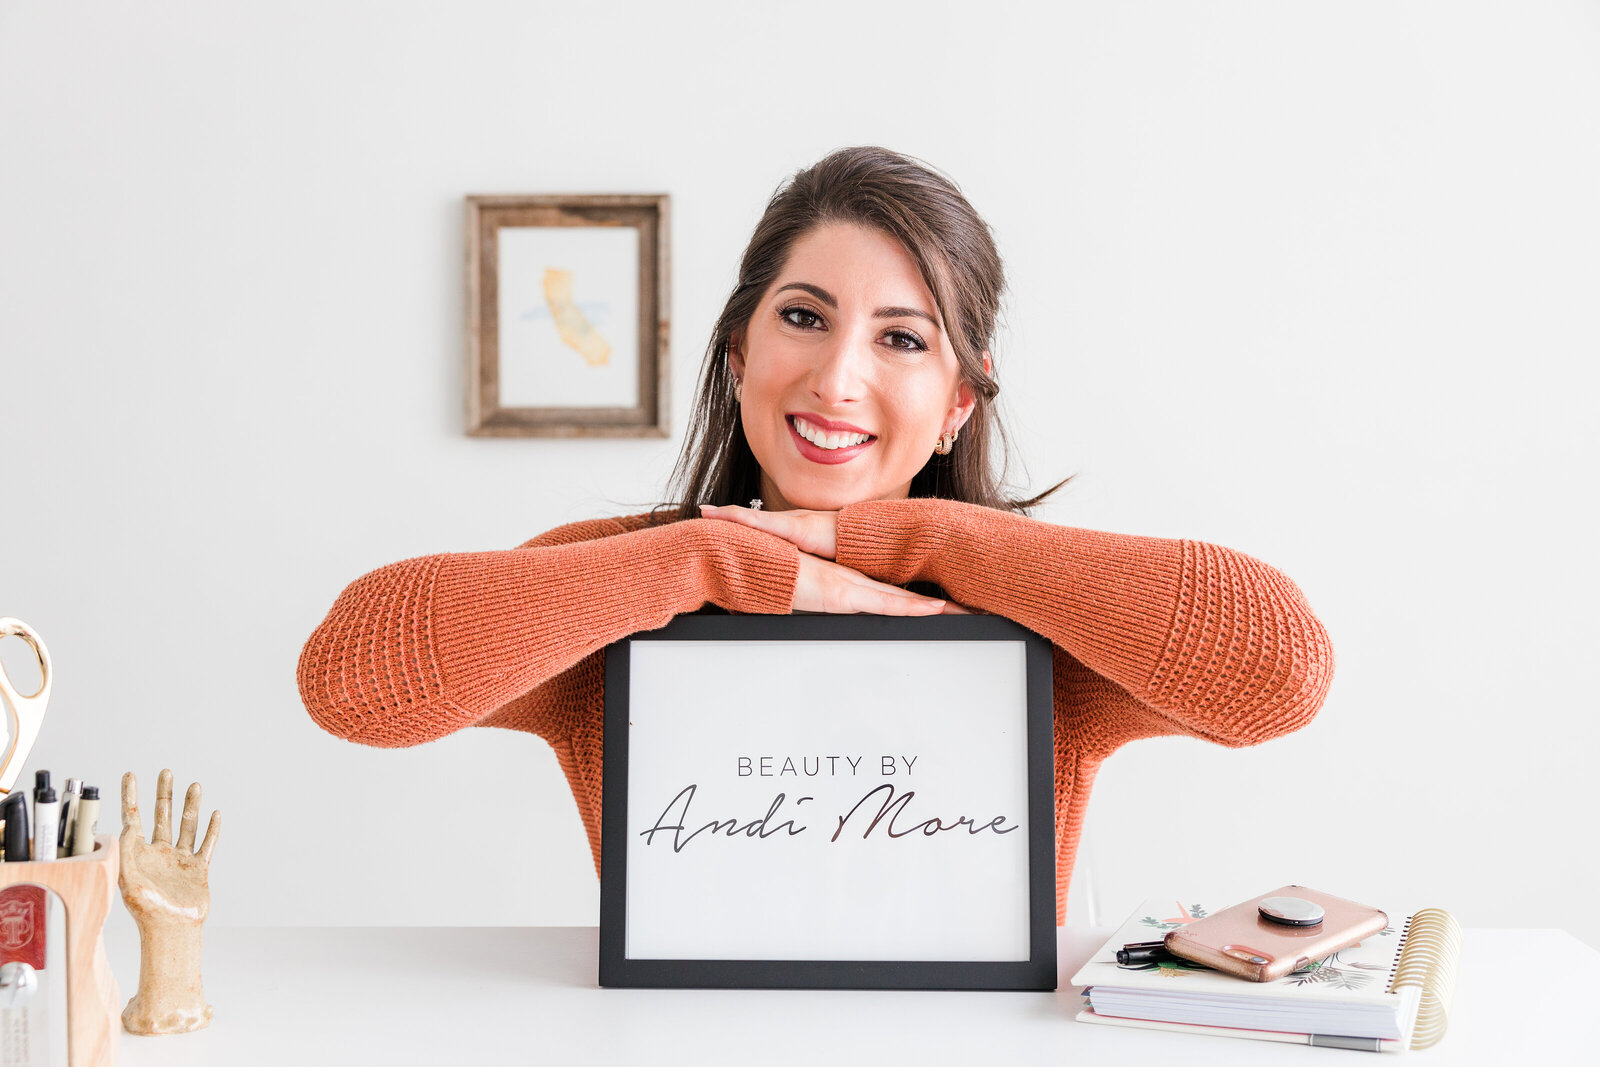 Make Up Artist Beauty By Andi More Branding Photography Female Orange Sweater Holding Business Sign at Desk